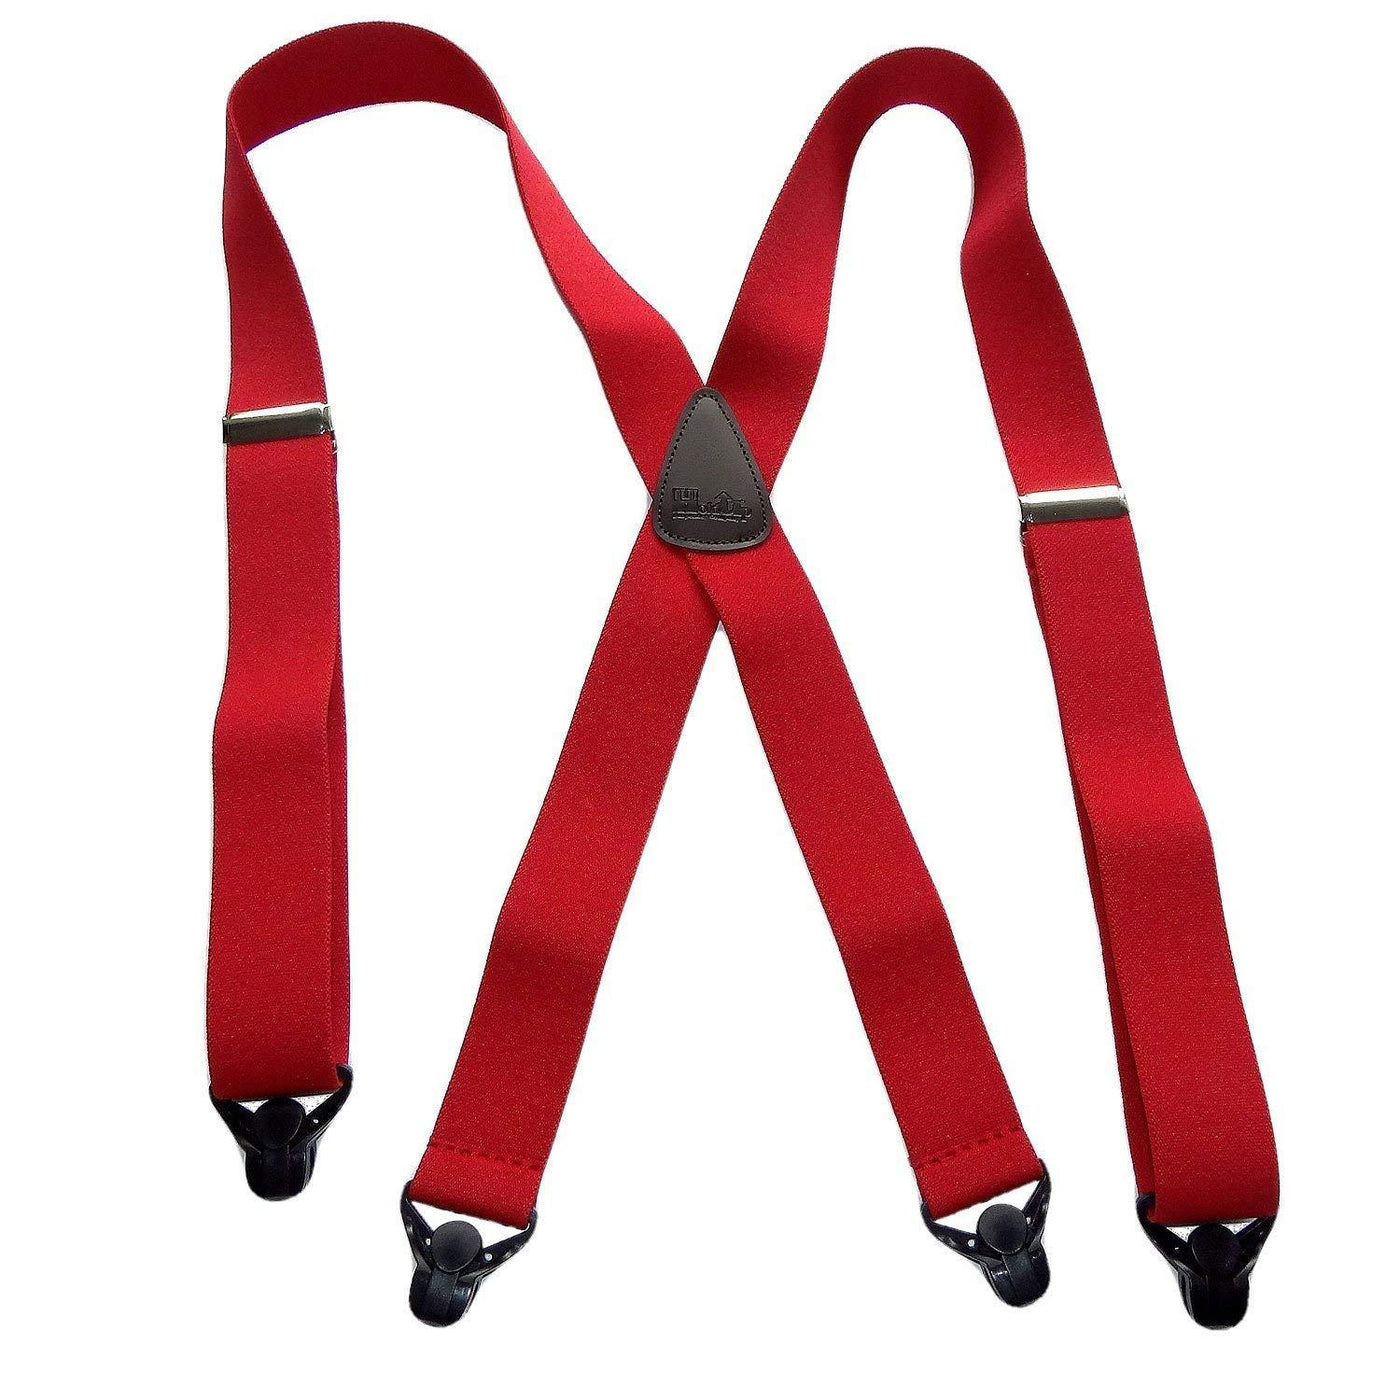 USA Made HoldUp Brand Ski-Ups series bright RED X-back Suspenders with  Patented Black Gripper Clasps in 1 1/2 width